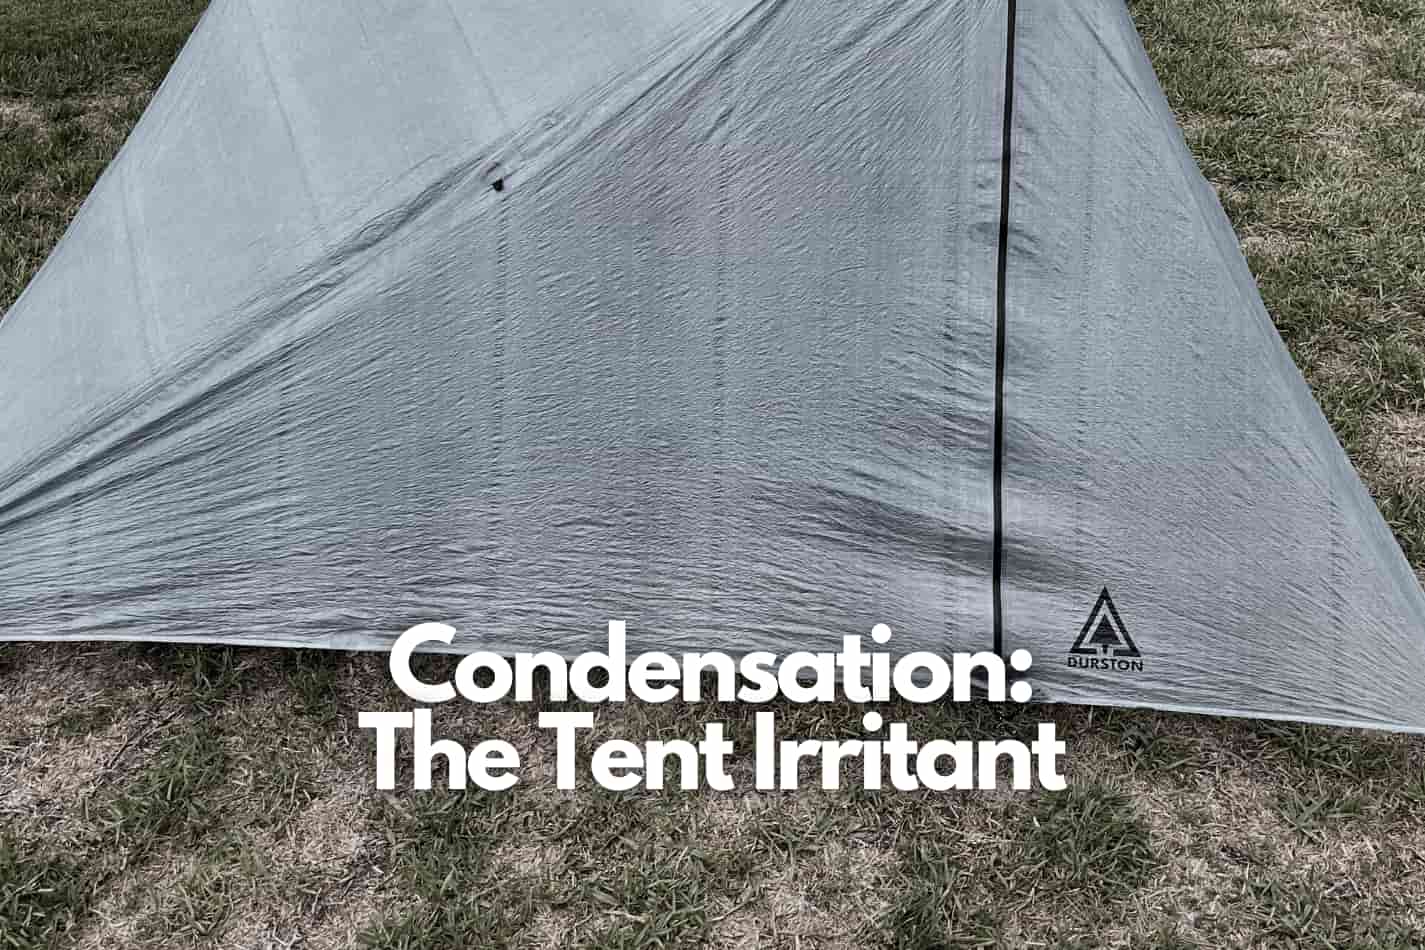 My Dan Durston X-Mid Pro 2 Person DCF Tent is a single wall tent which will always have condensation buildup